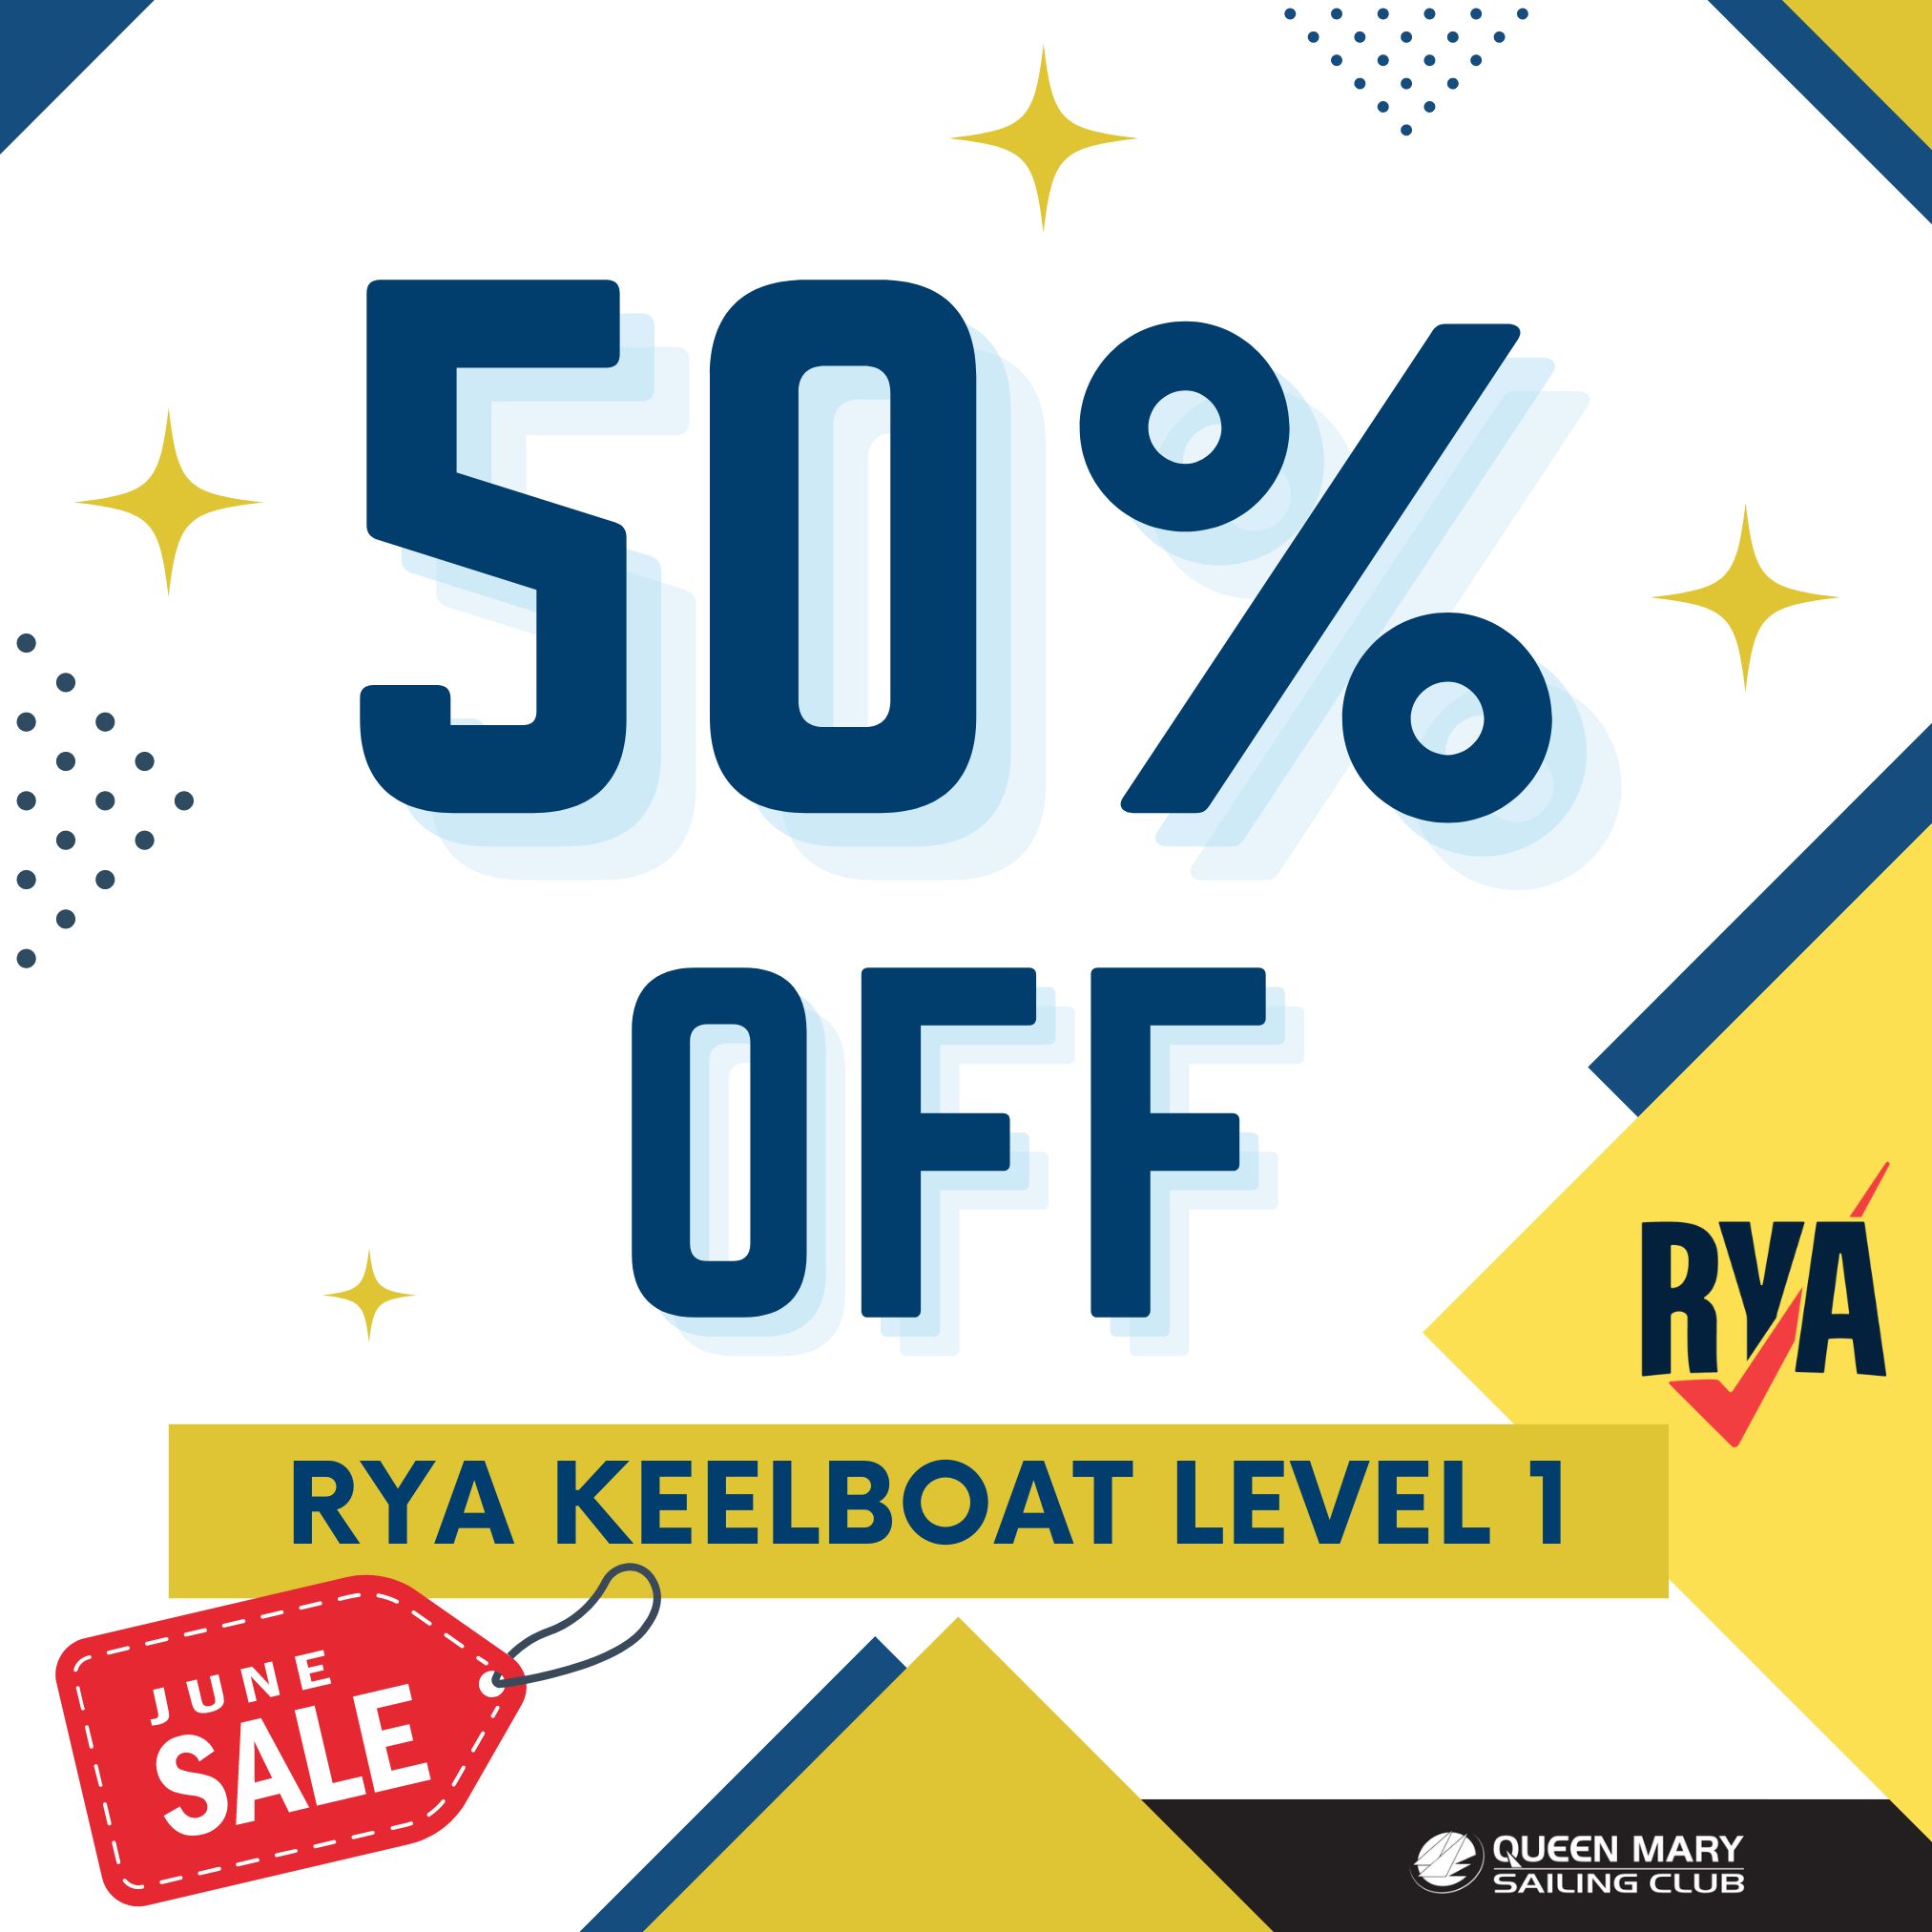 50 off Discount Saving Offer Discounted RYA Level 1 Keelboatingurse2